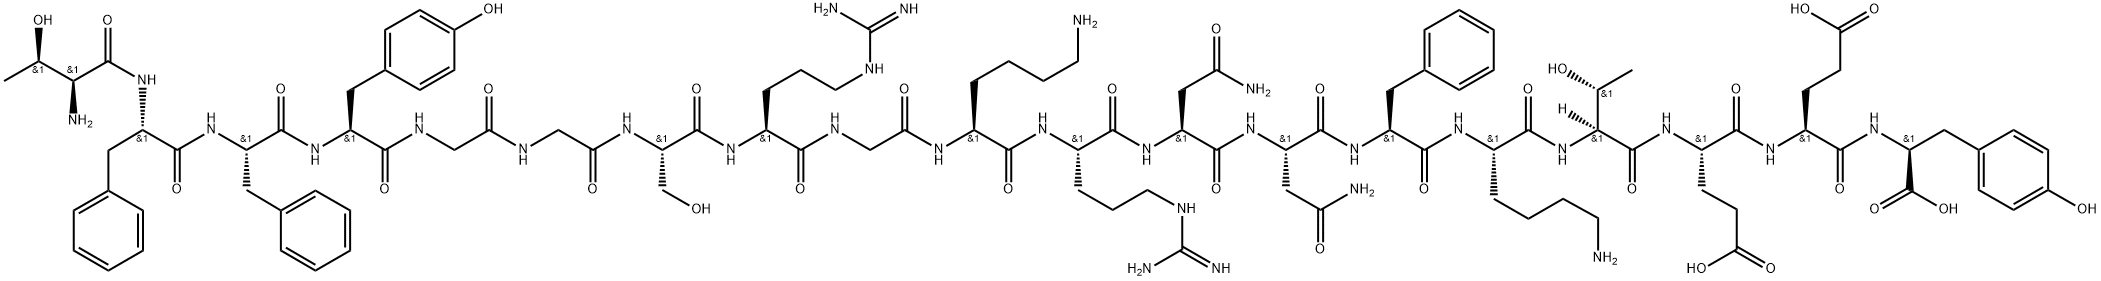 Angiopep-2 structure